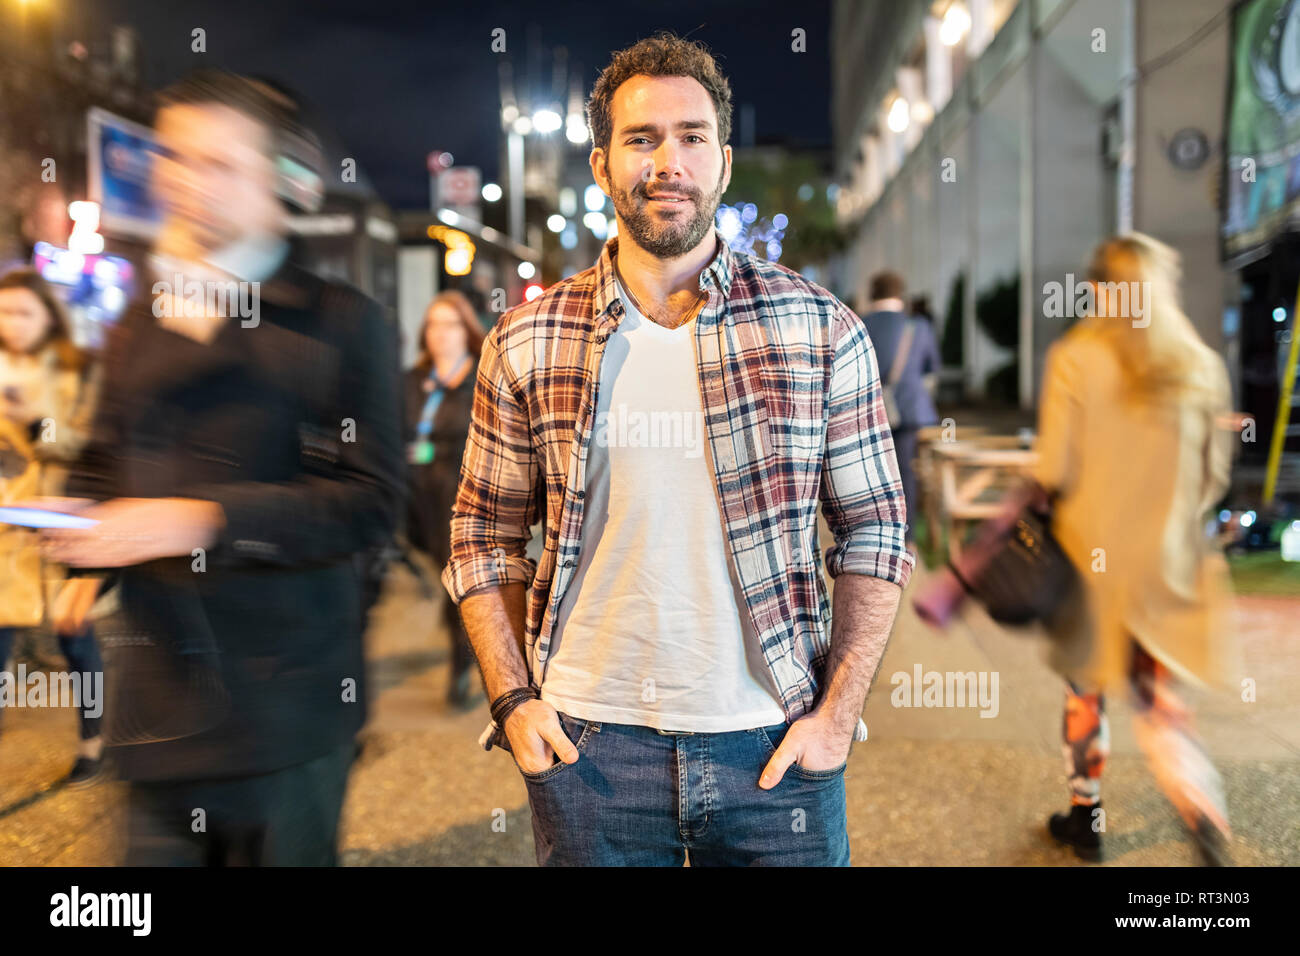 UK, London, portrait of a smiling commuter by night with blurred people passing nearby Stock Photo